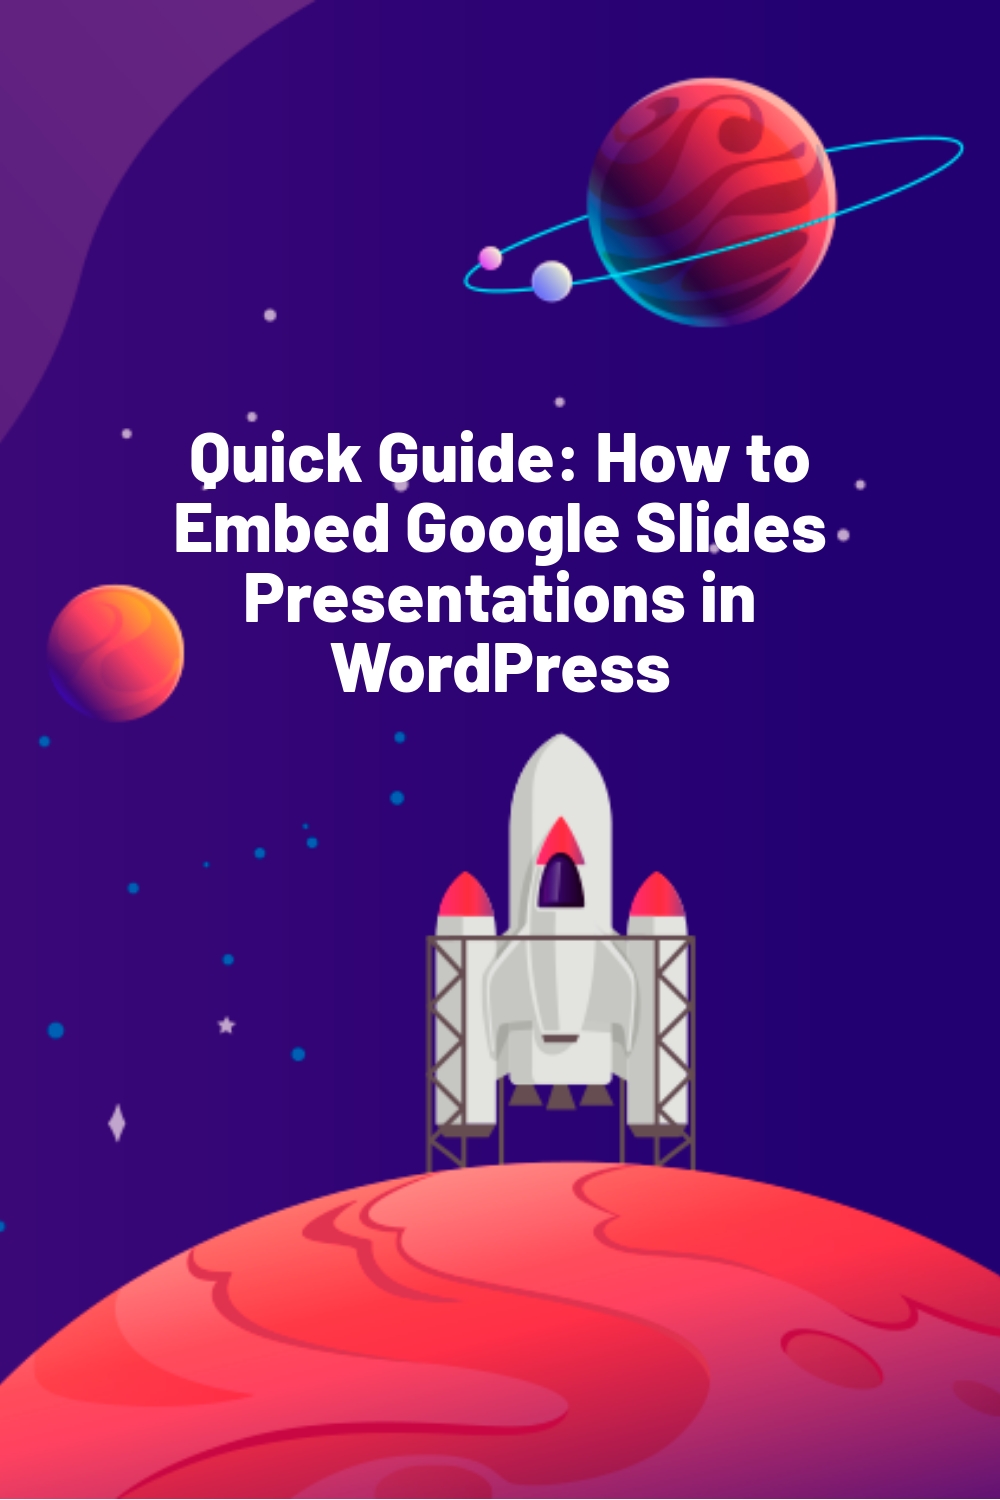 Quick Guide: How to Embed Google Slides Presentations in WordPress